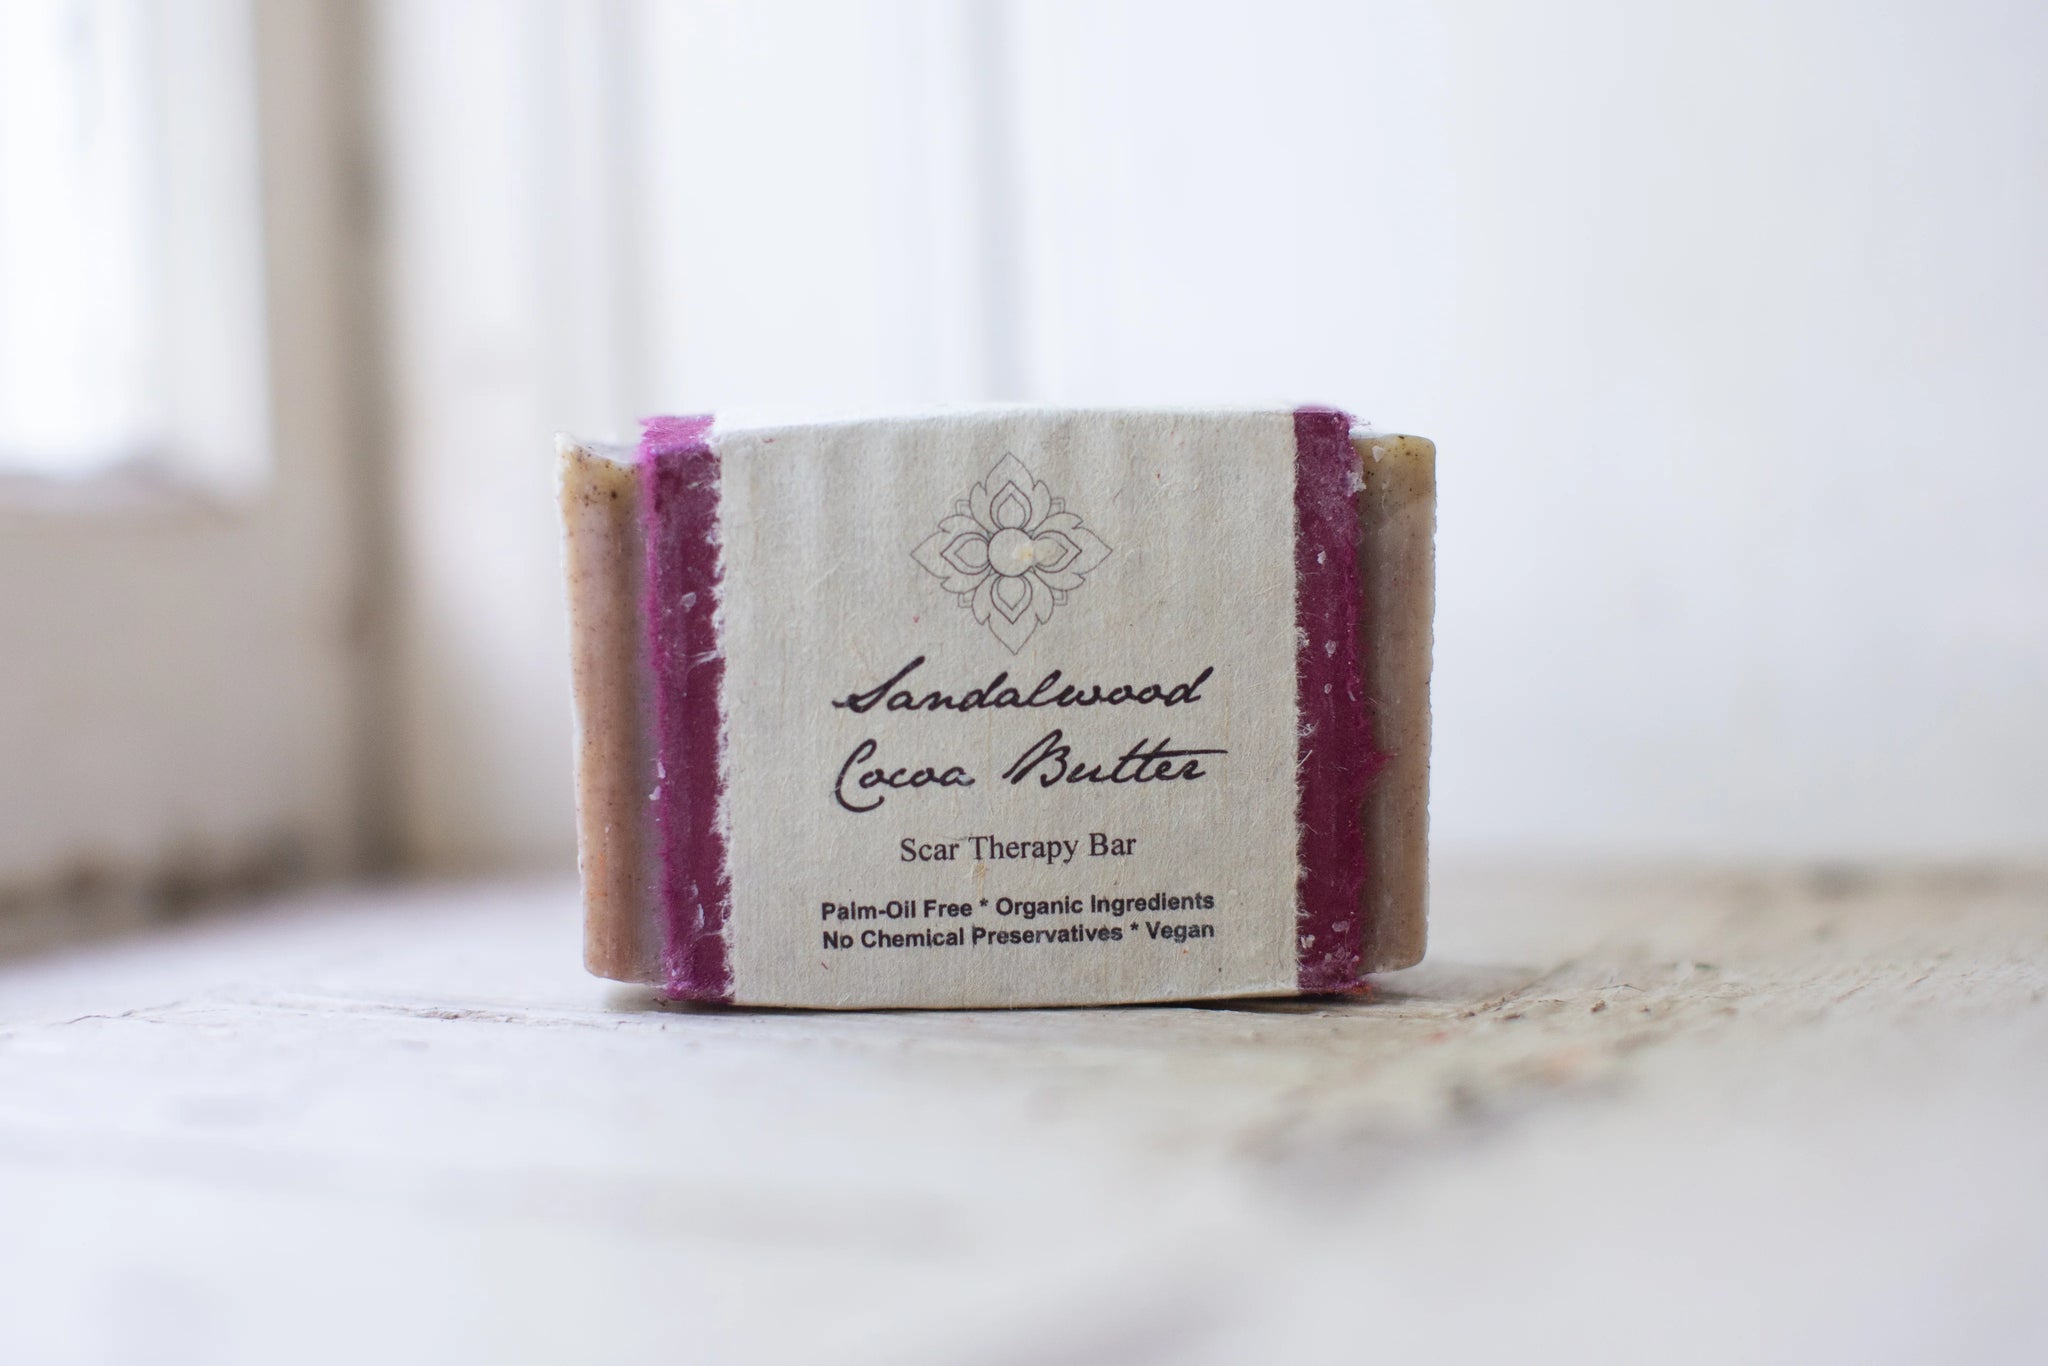 Sandalwood Cocoa Butter Scar Therapy Bar